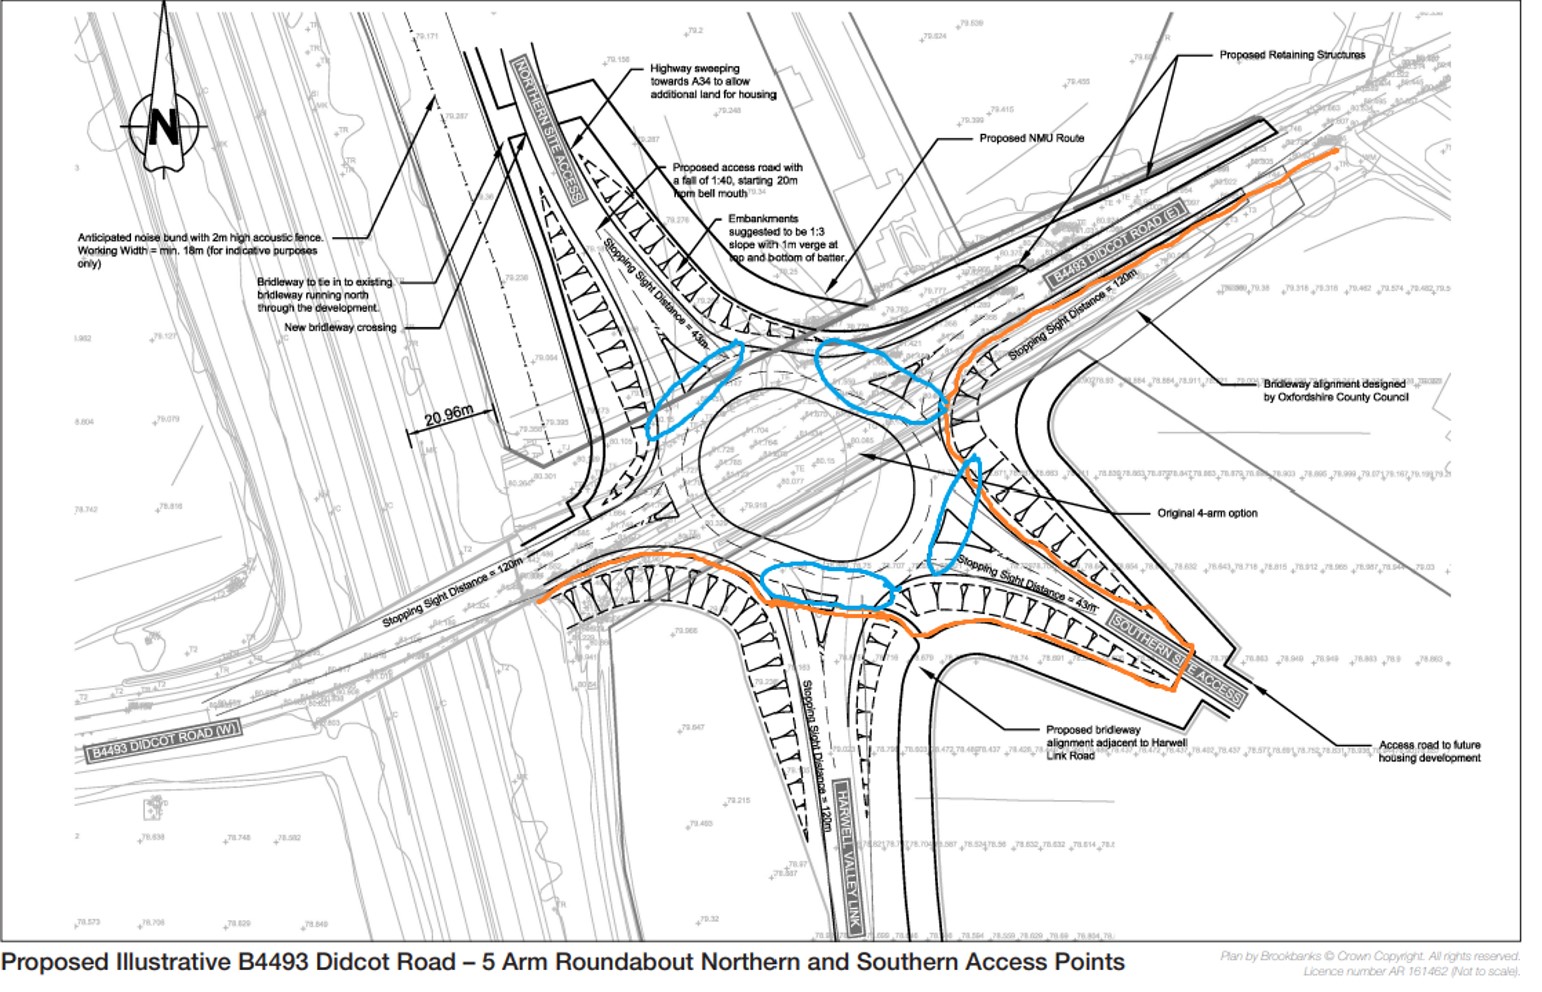 Proposed roundabout, with markings to show issues